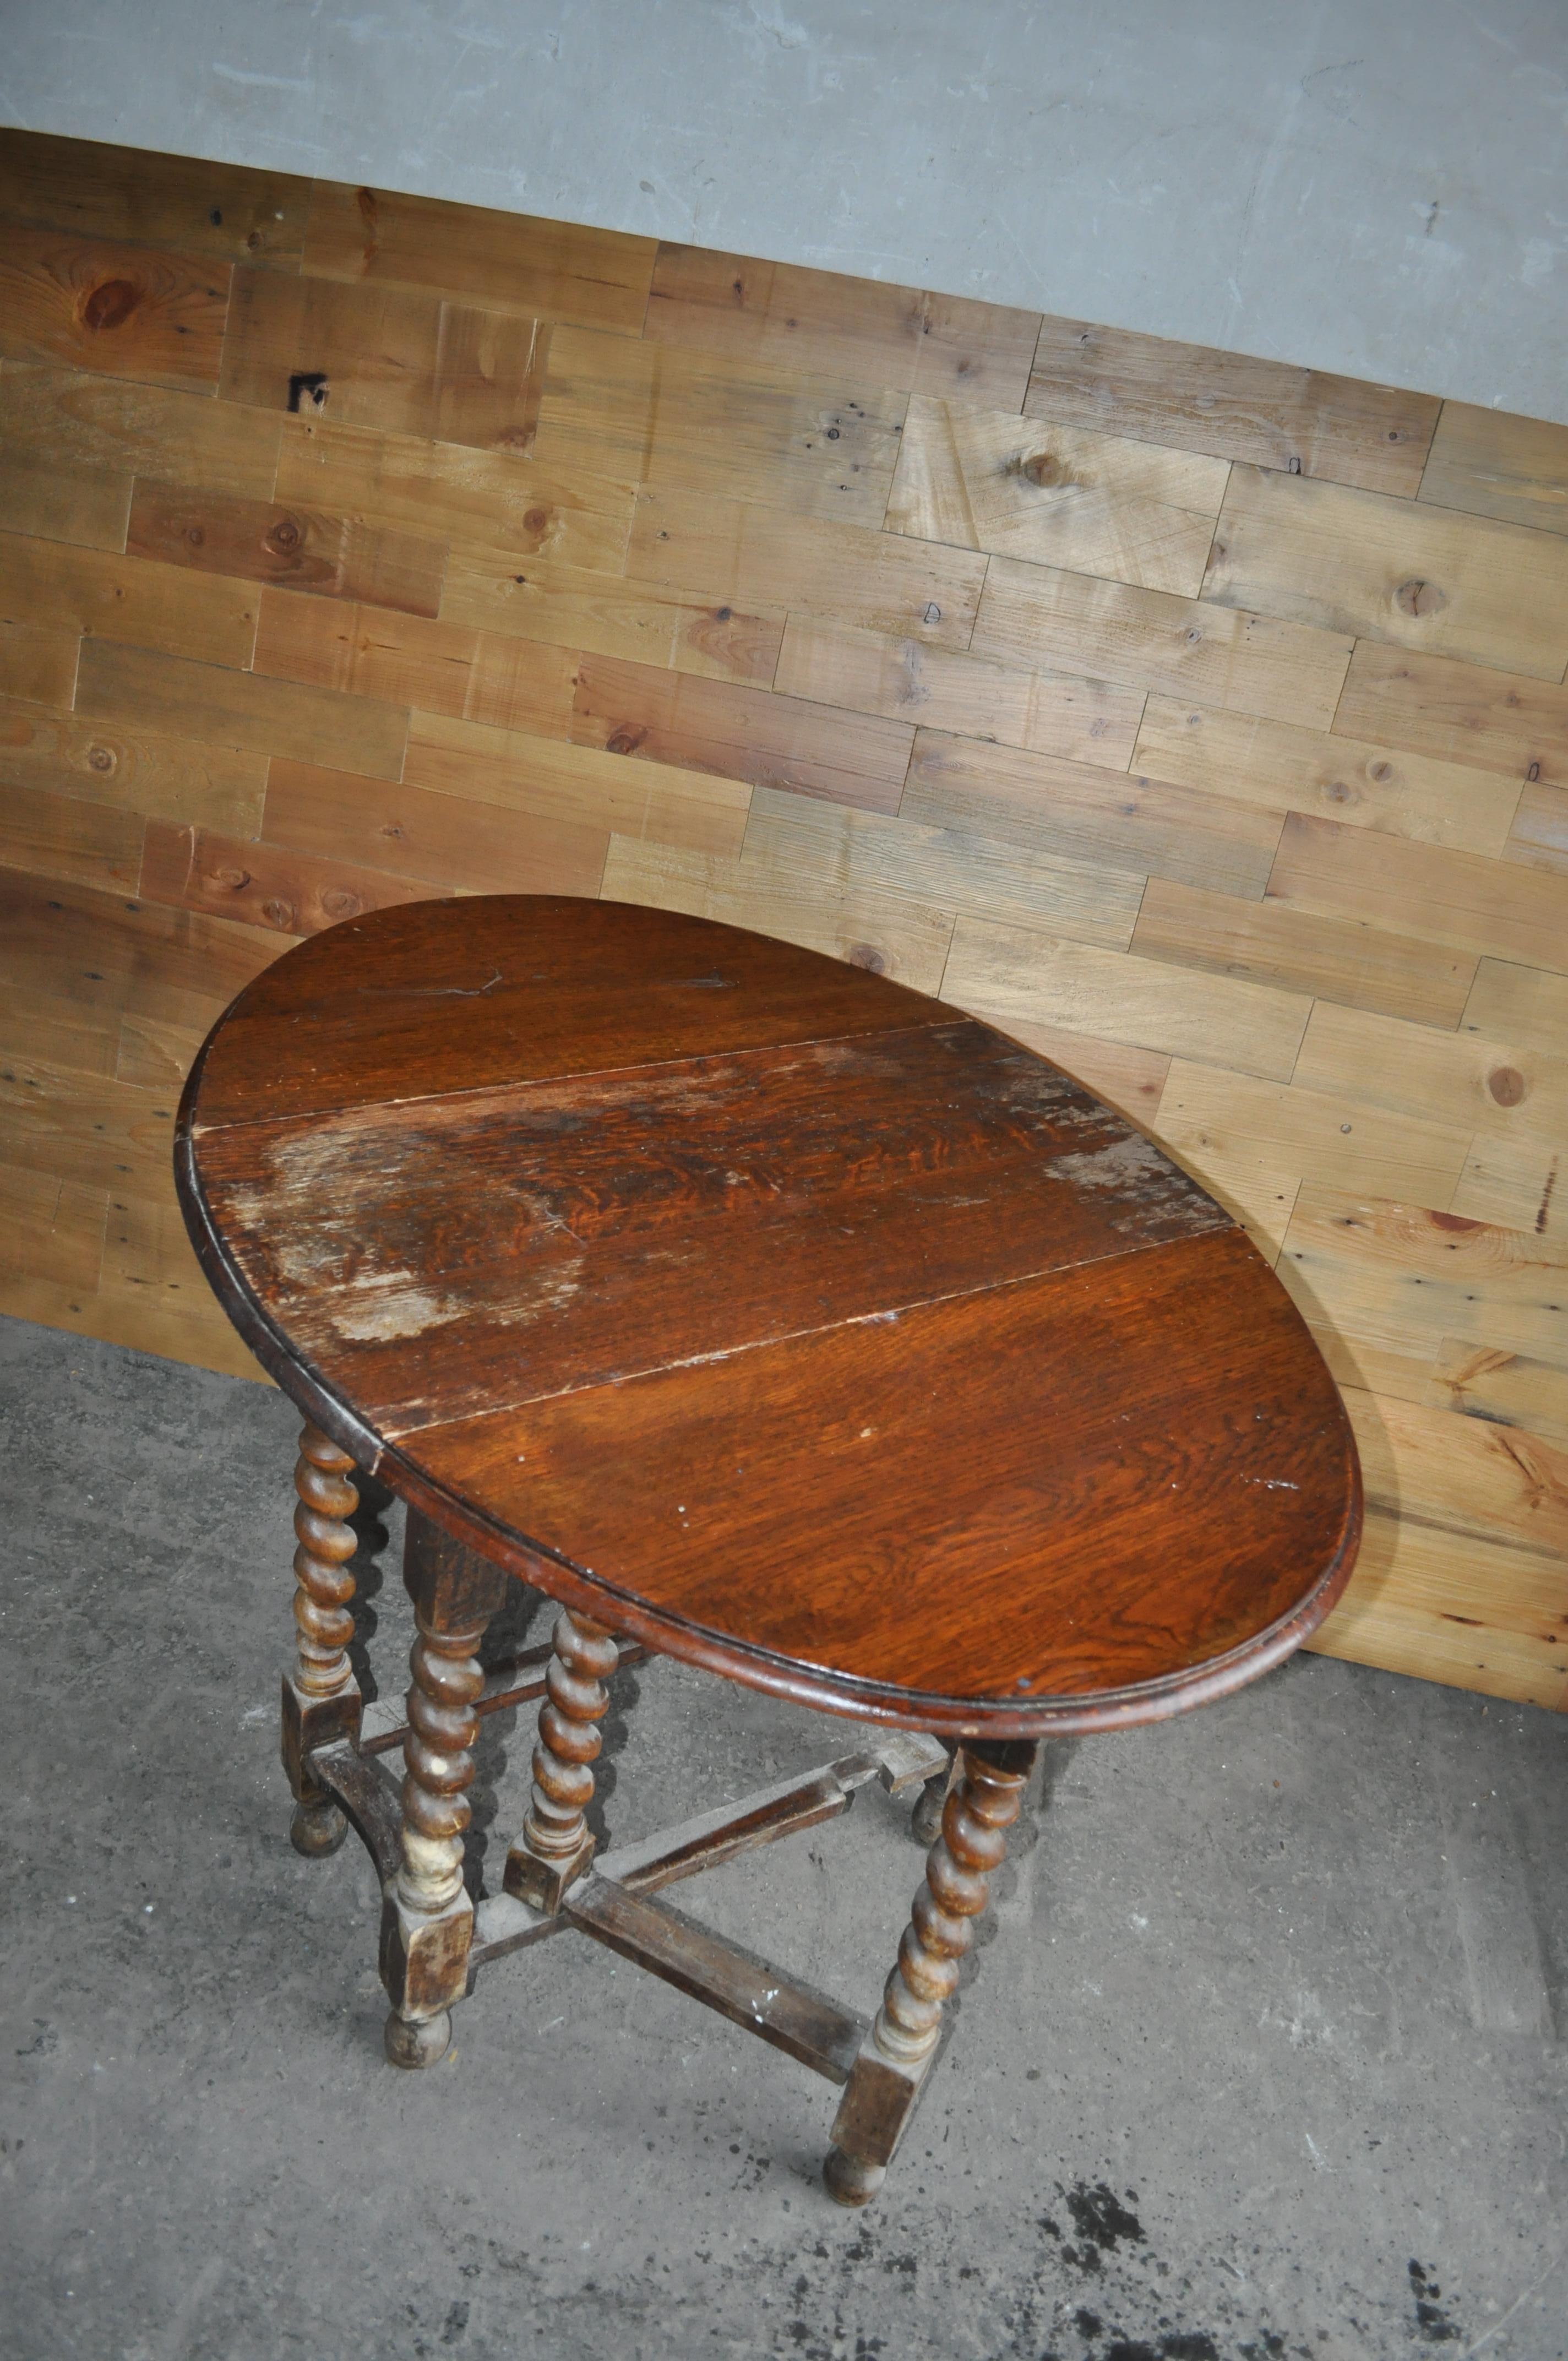 Stained Antique English Oak Drop Leaf Dining Table, Rustic Gate Leg Table, 19th Century